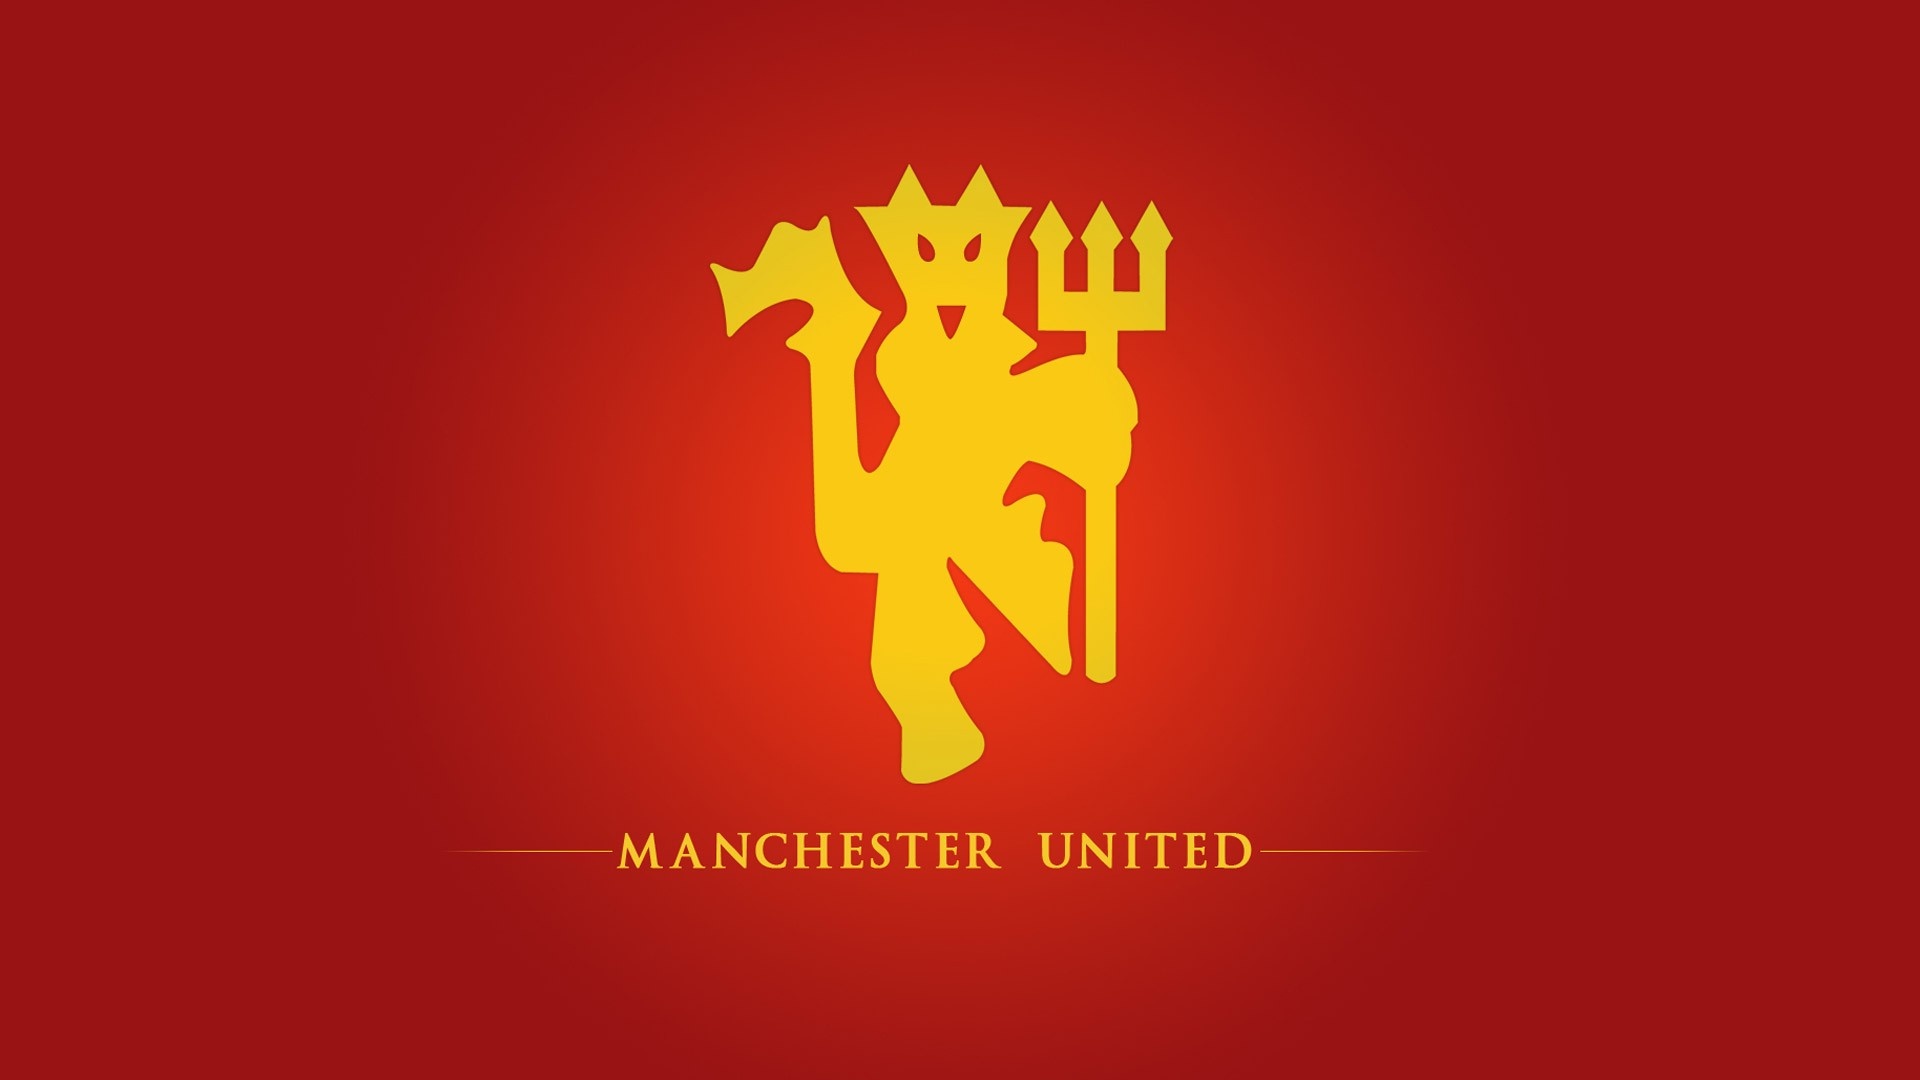 Manchester United, Celebrated history, Thrilling victories, Emblematic logo, 1920x1080 Full HD Desktop